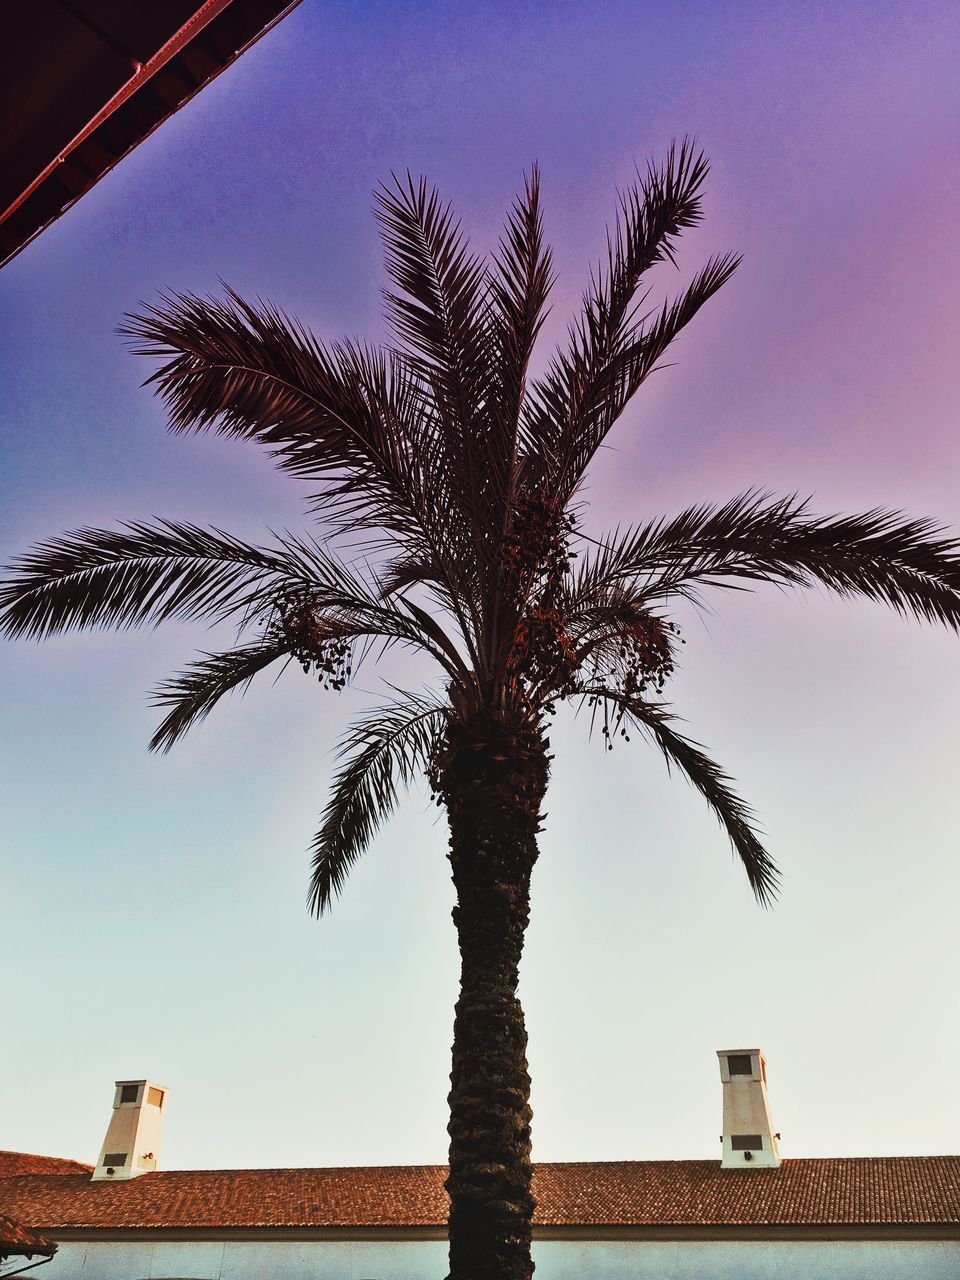 LOW ANGLE VIEW OF PALM TREE BY BUILDING AGAINST SKY